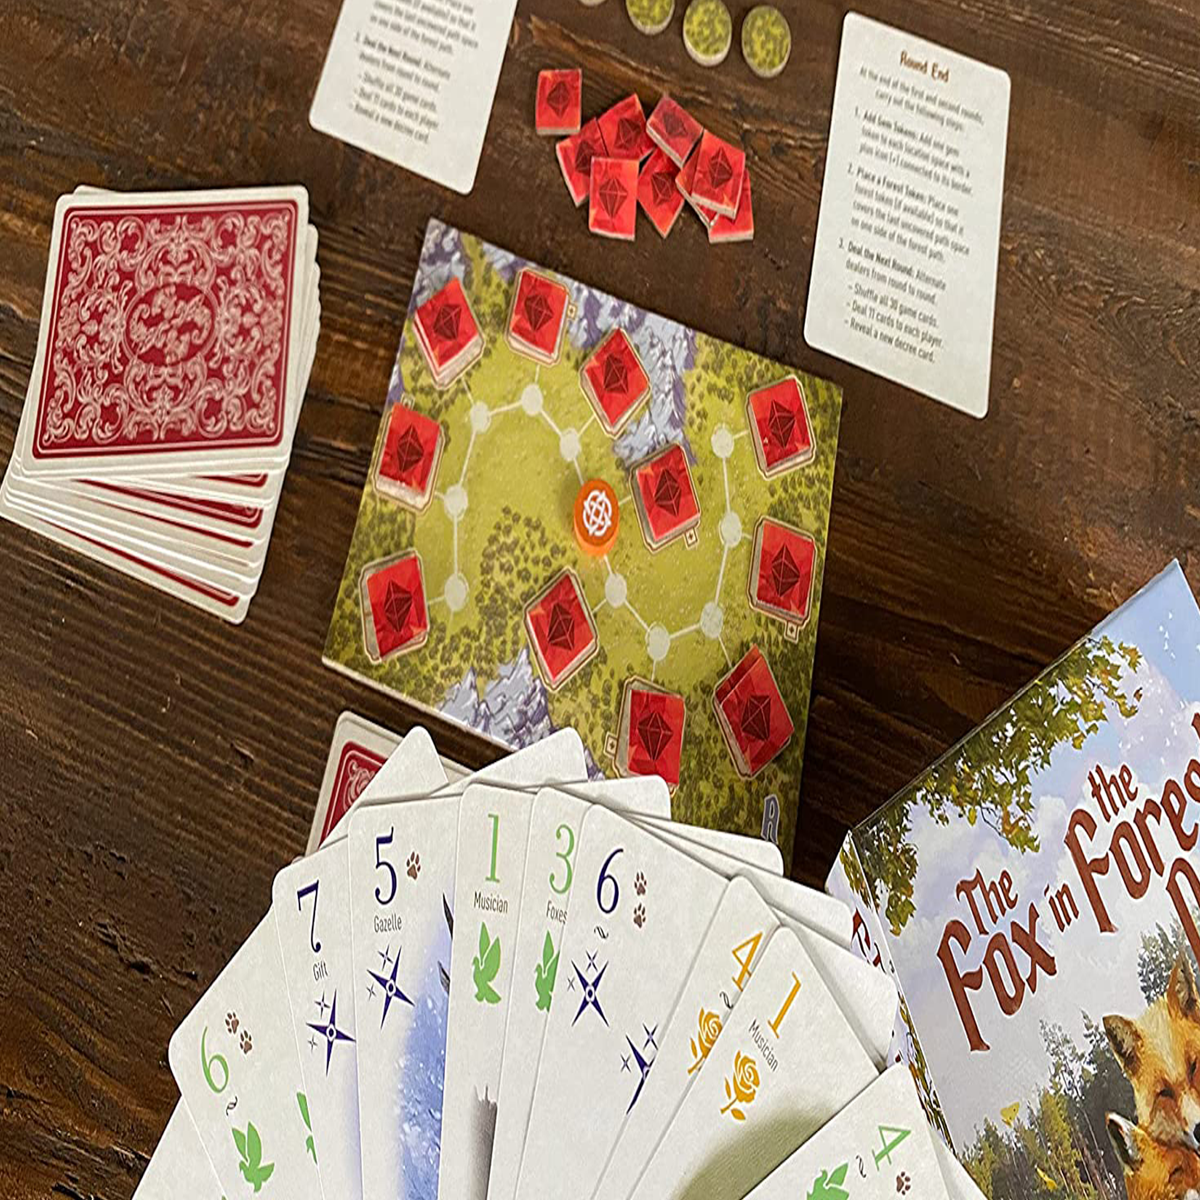 5 new twists on classic board games